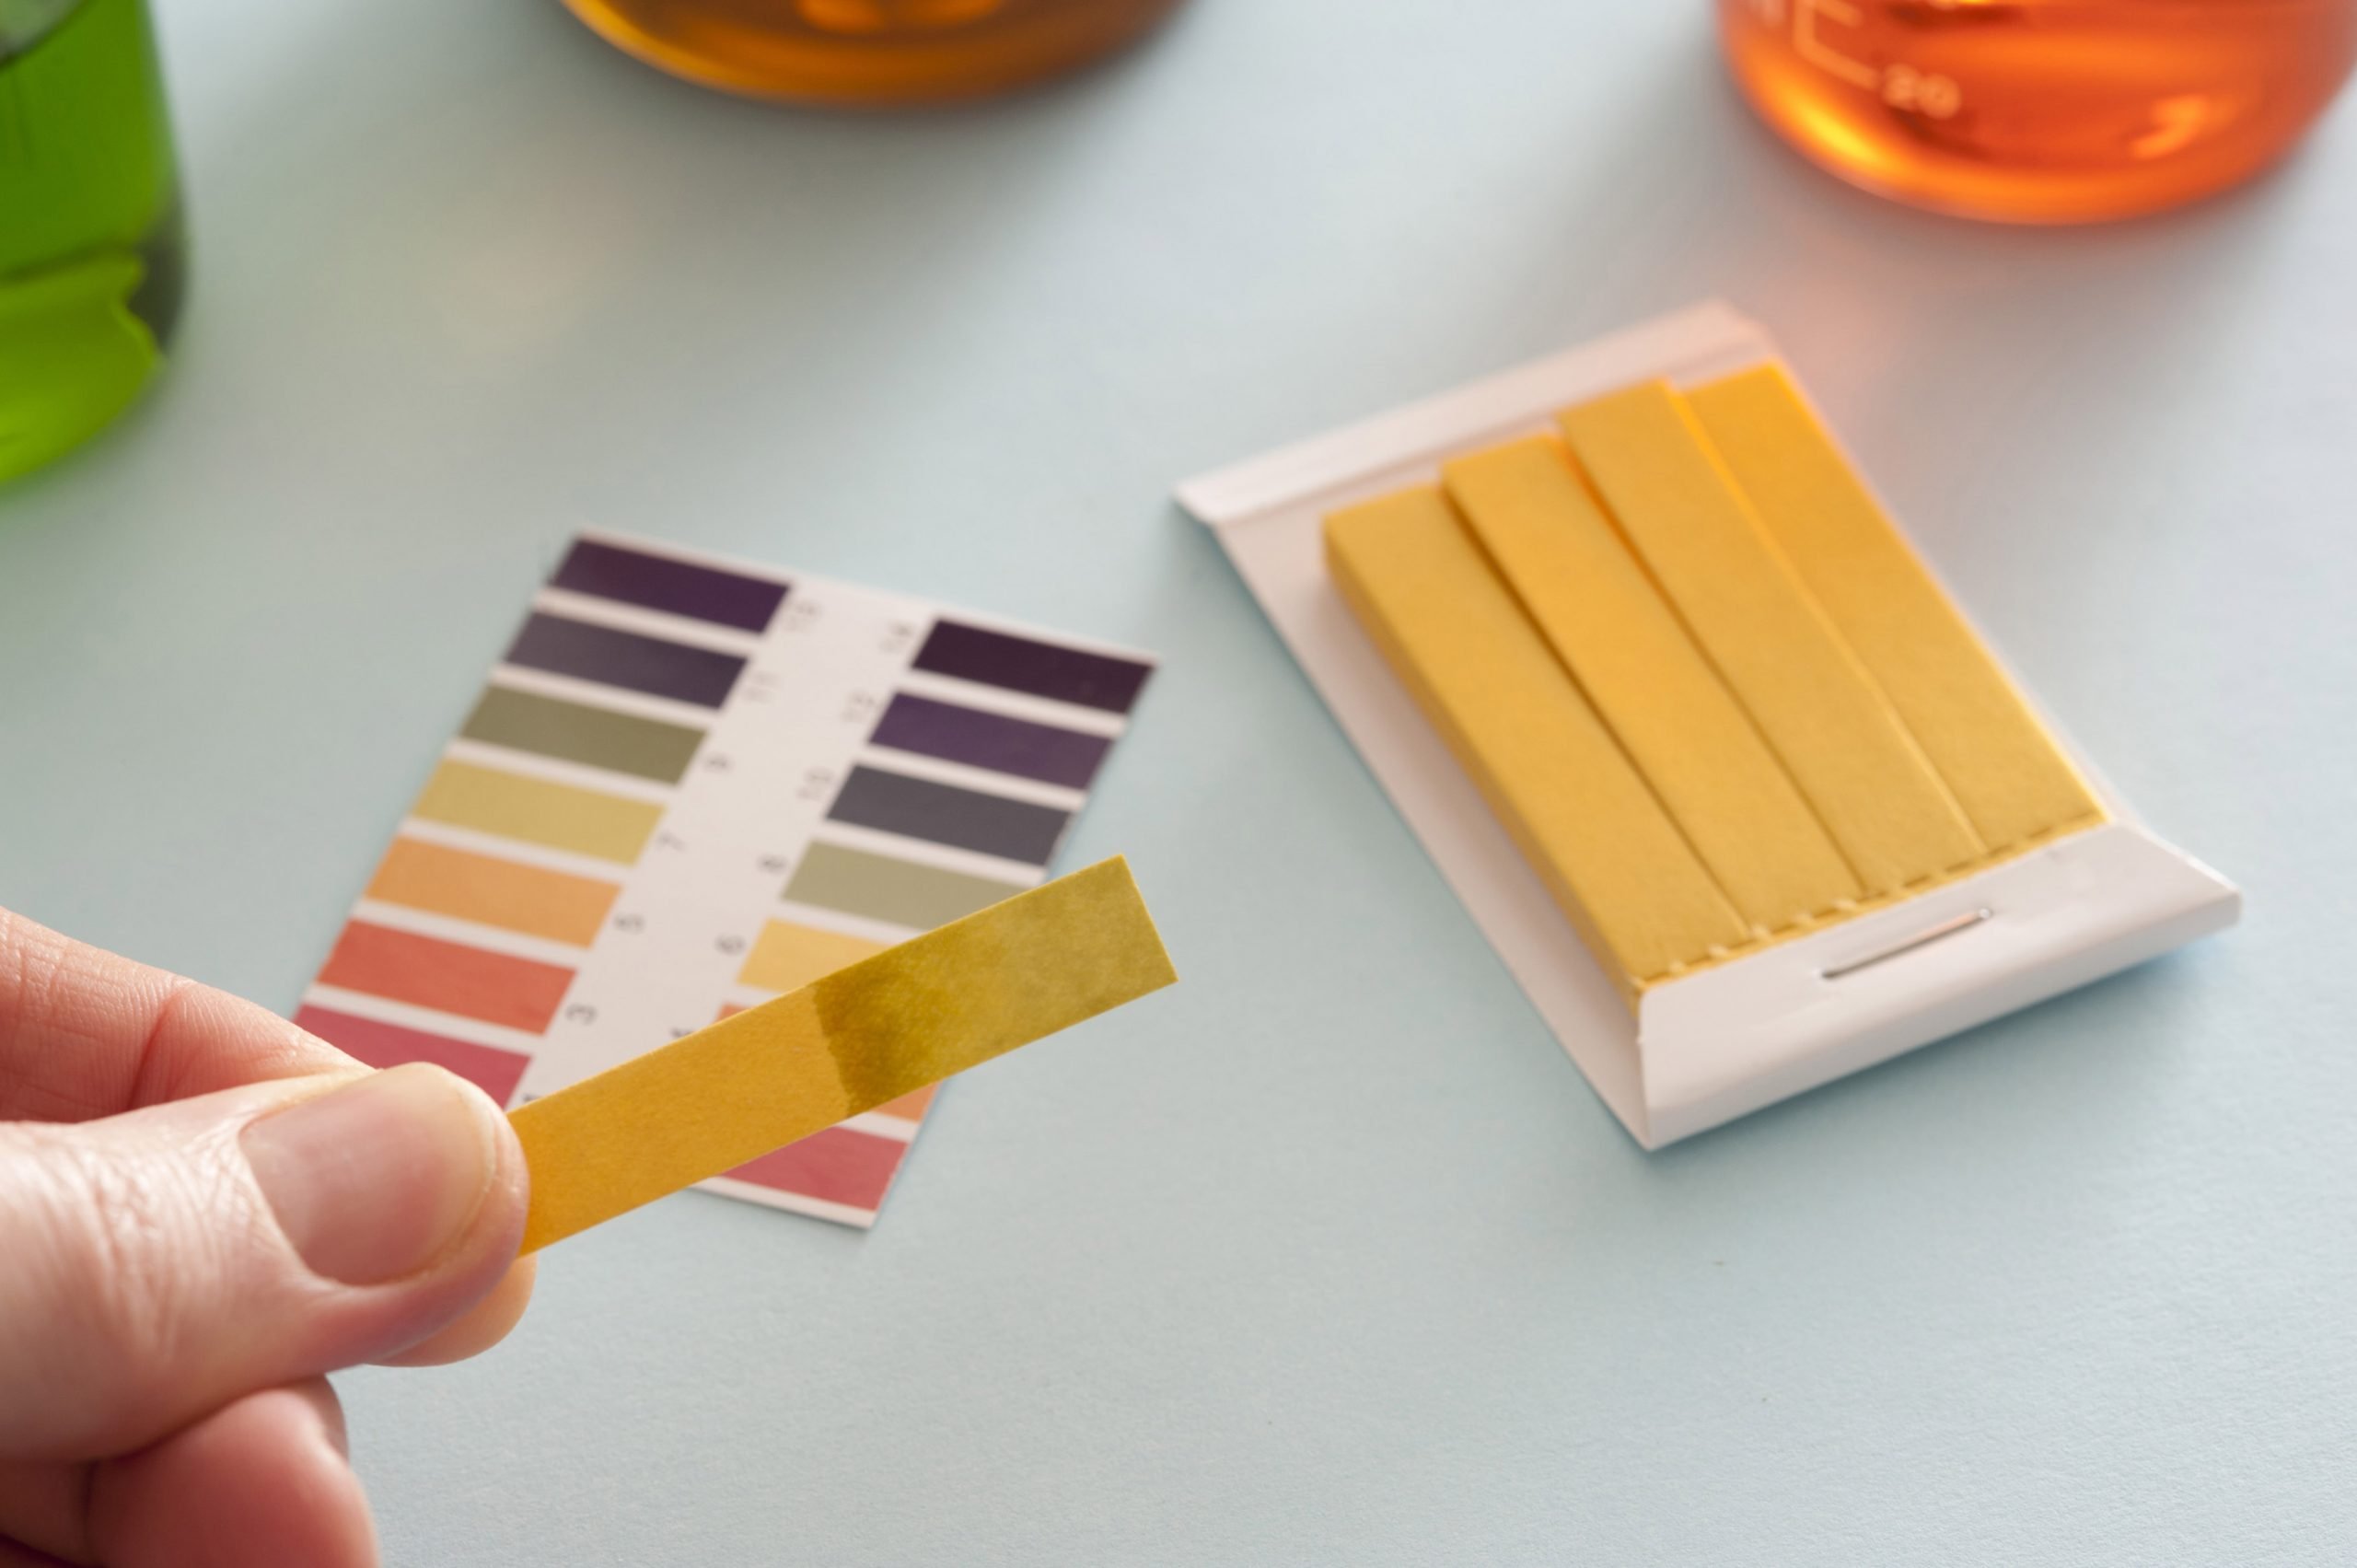 Free Stock image of PH litmus paper test with sampler ...